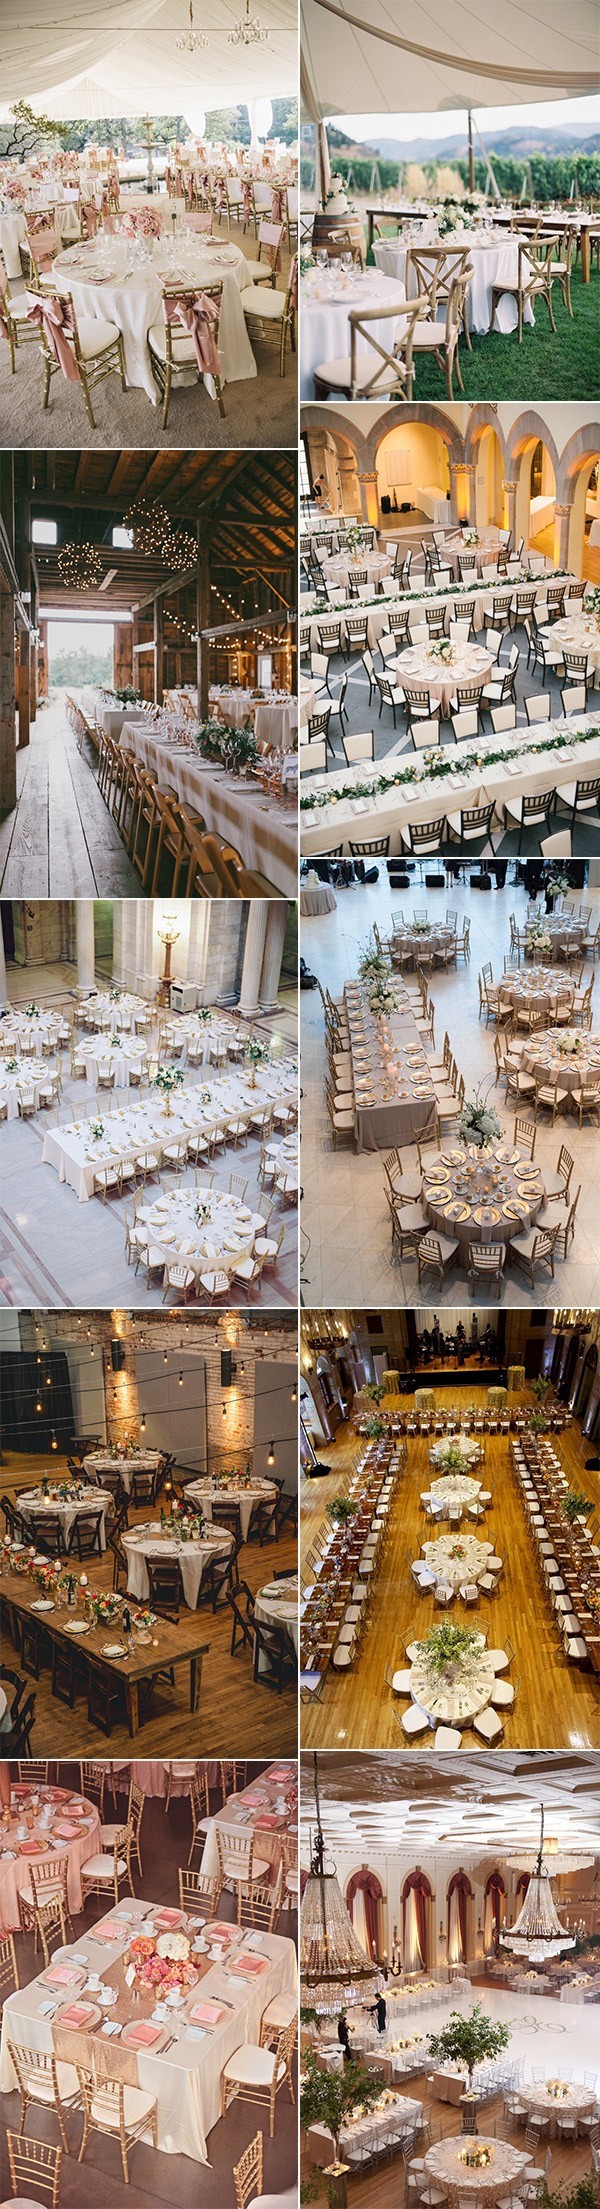 wedding reception table layout ideas for 2018 trends